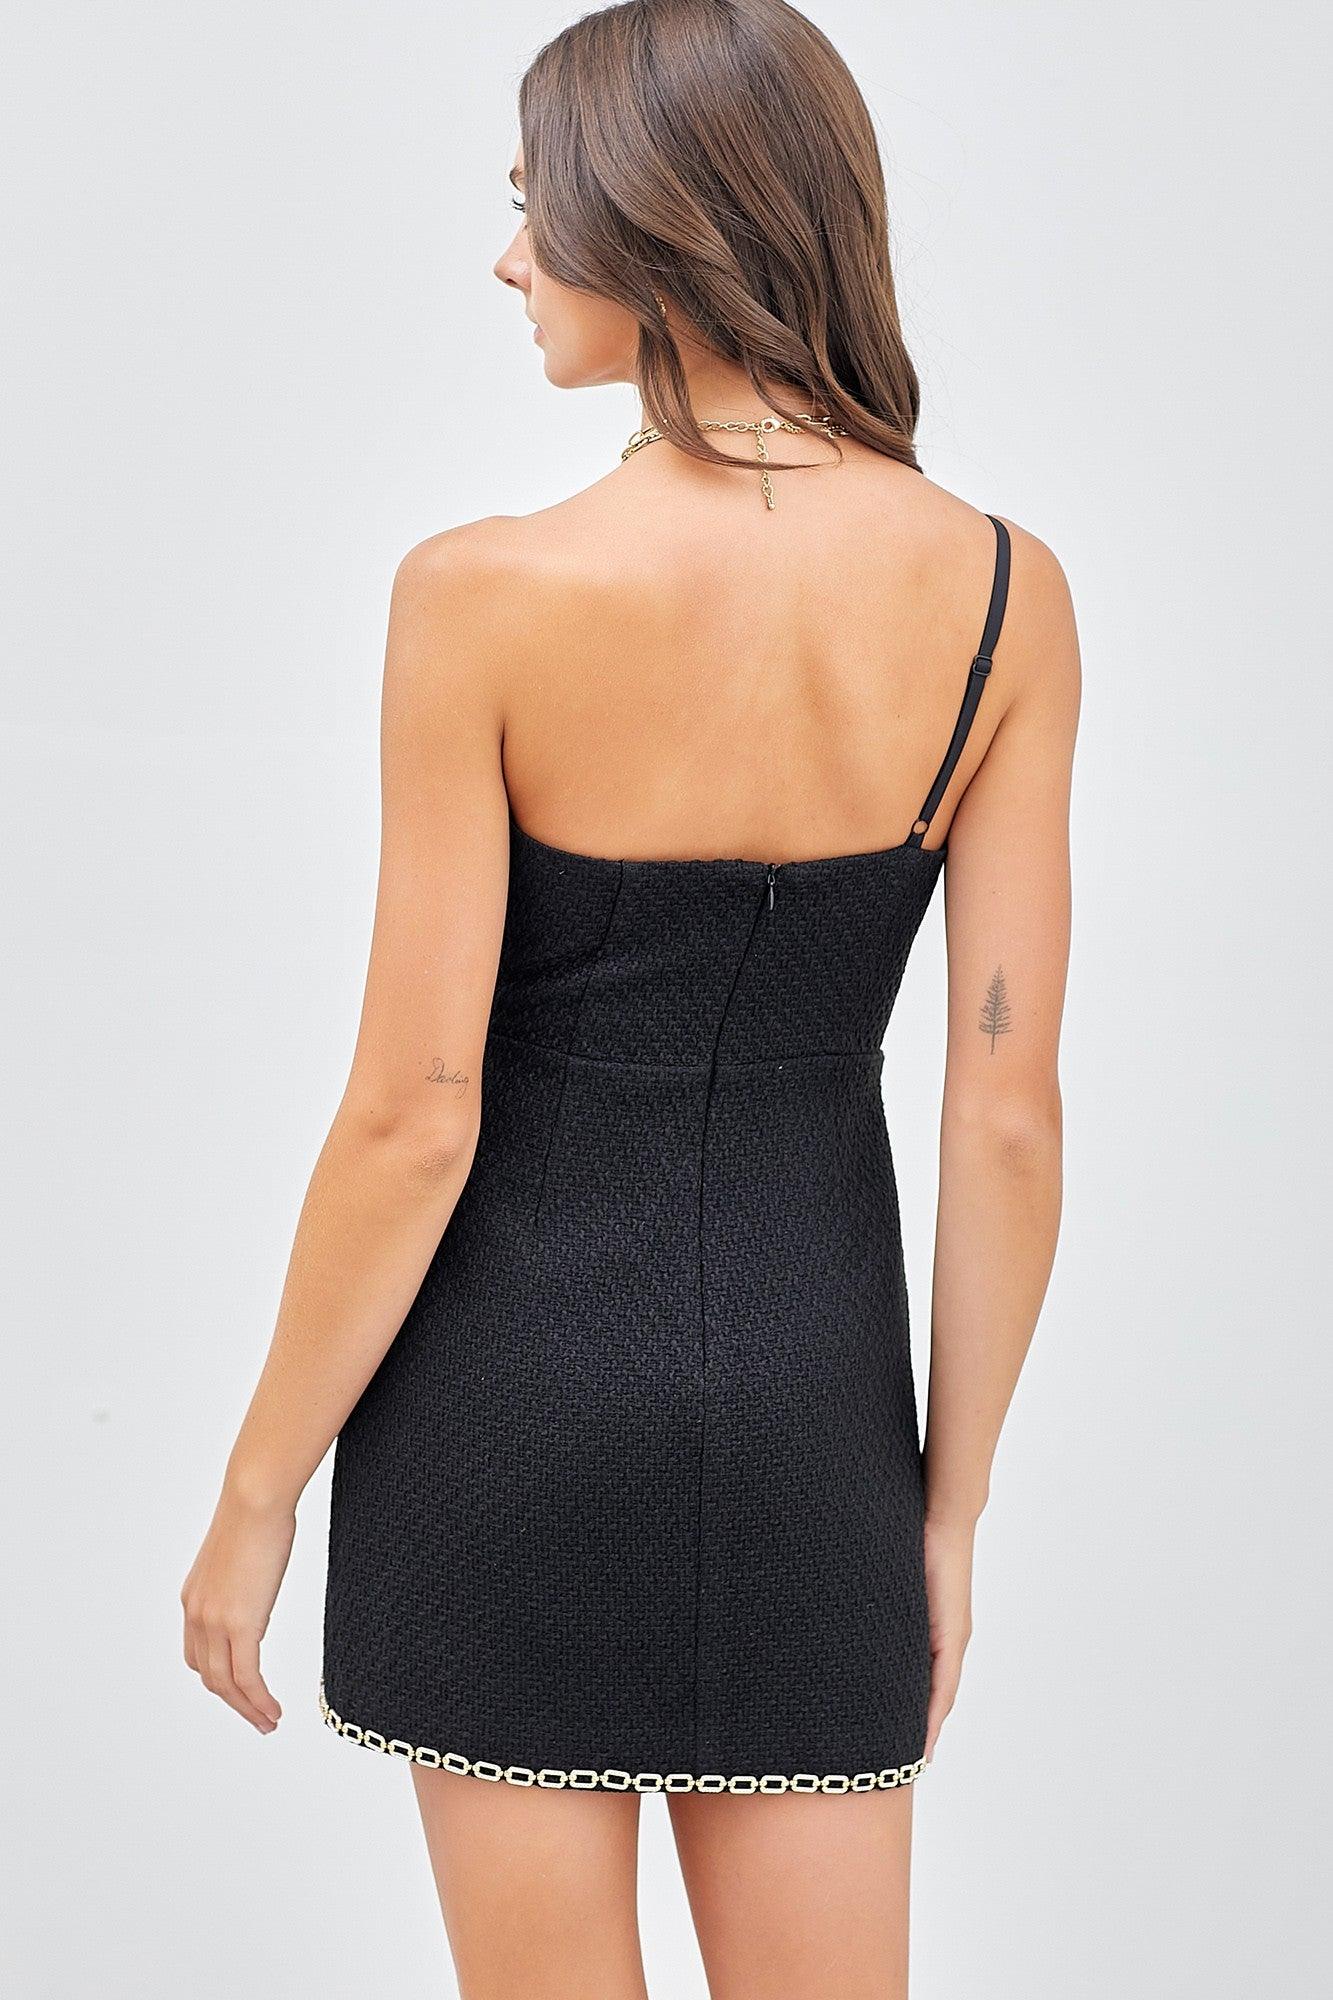 tweed one strap chain trim dress - RK Collections Boutique